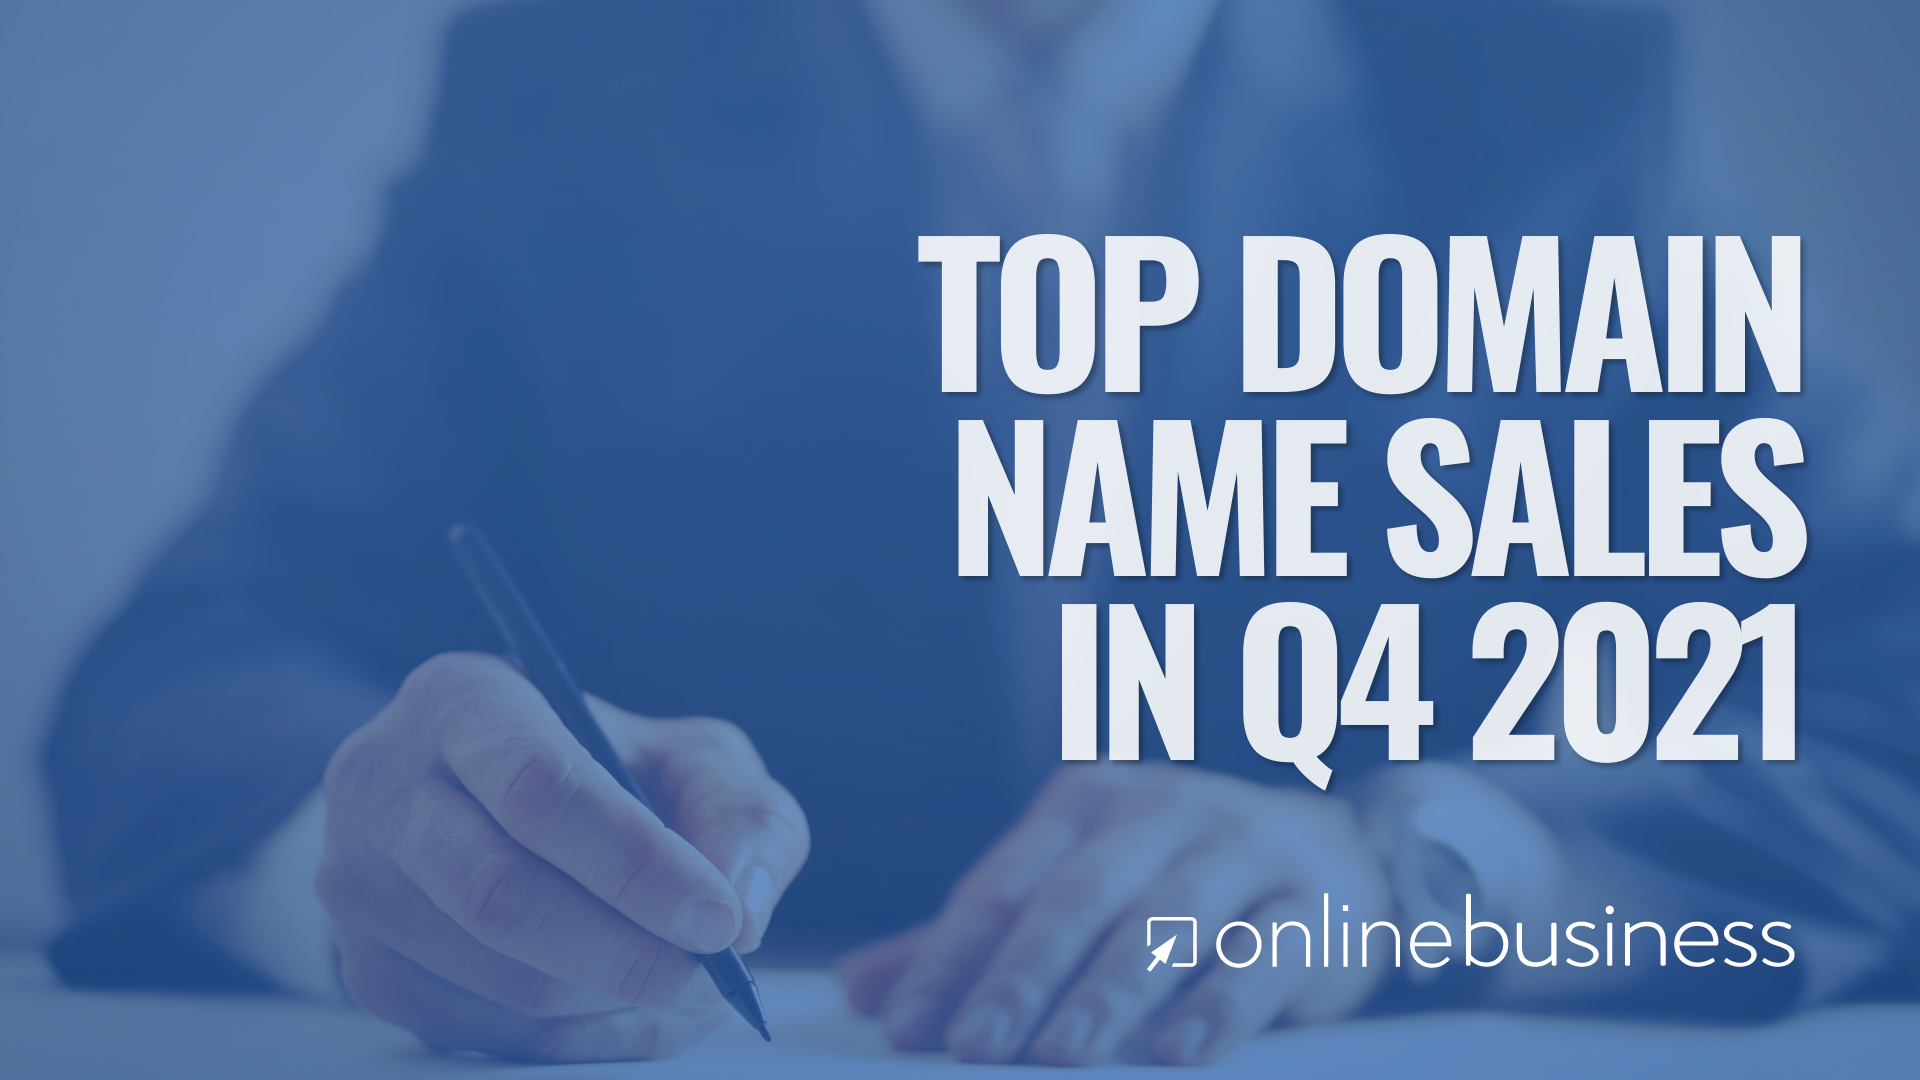 OnlineBusiness.com Shares Insights on the Top Domain Sales for Q4 of 2021